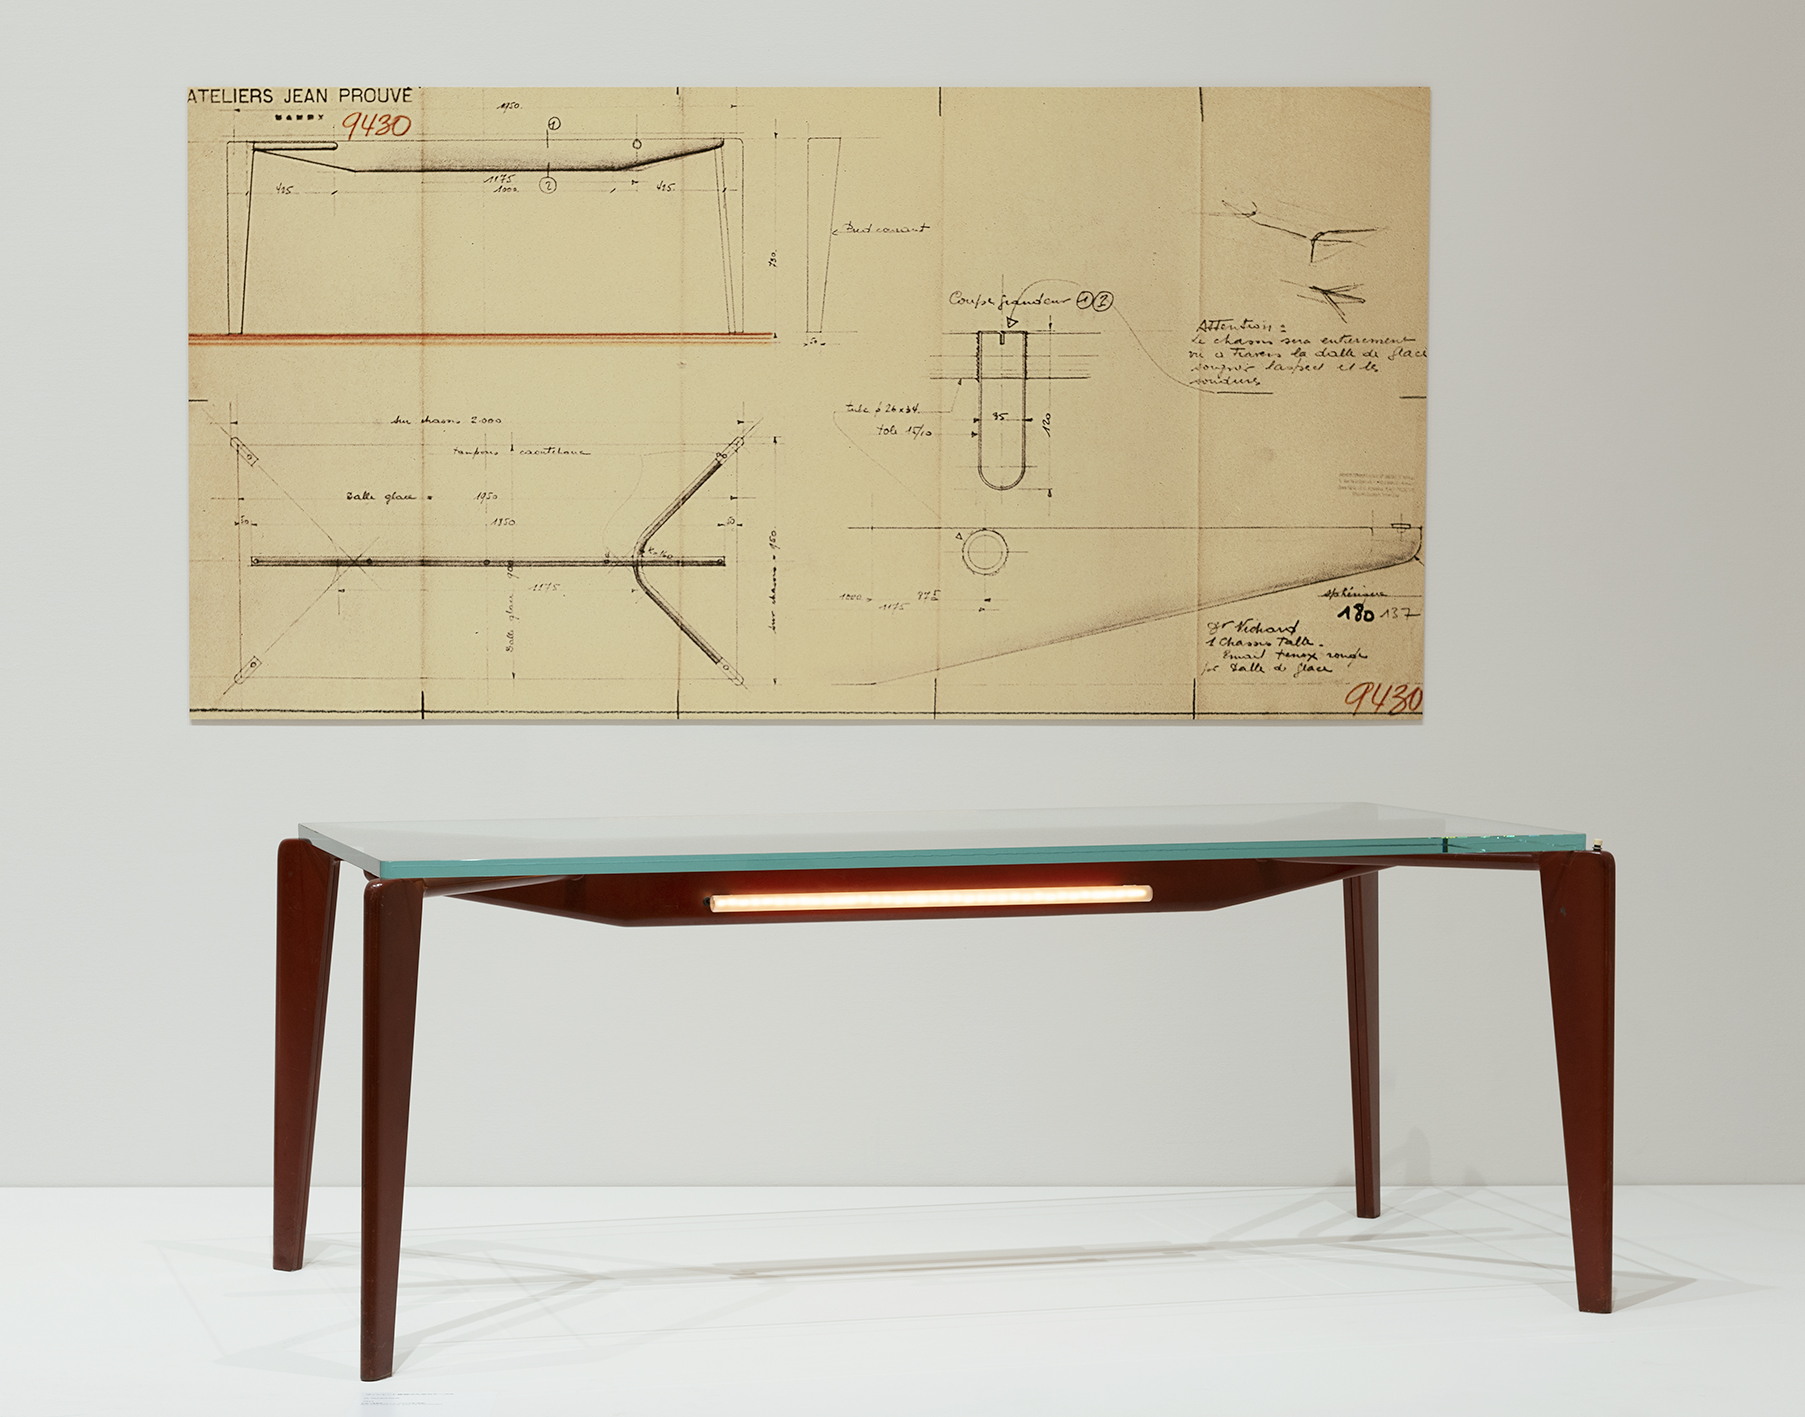 Flavigny table, model with thick glass table-top. Specially made for Dr Vichard 1944.